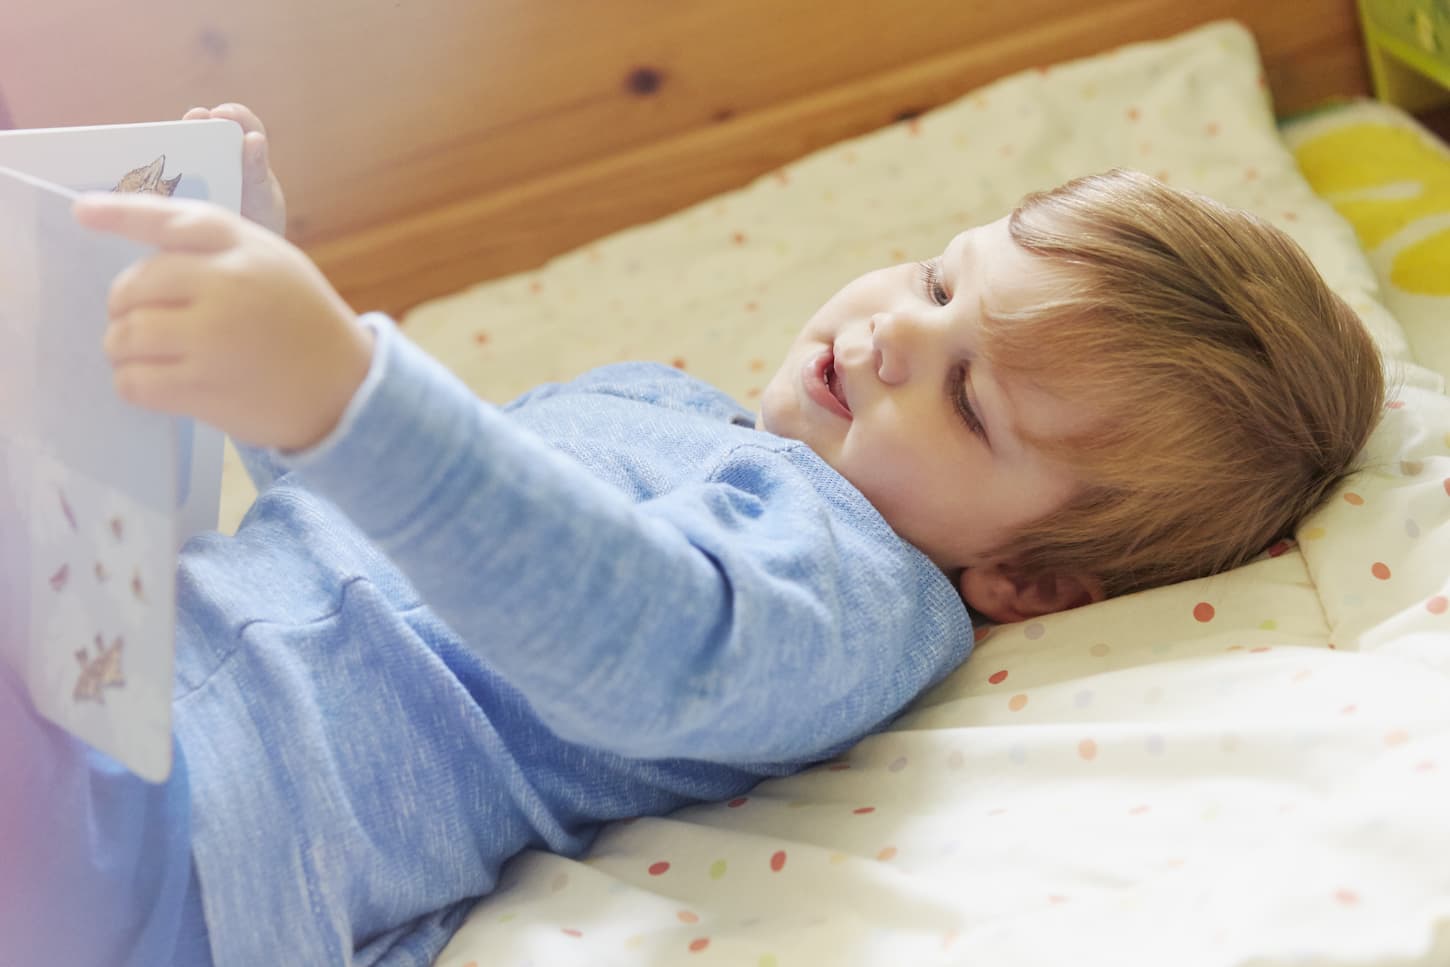 An image of a Boy lying on his back in bed looking at a storybook.